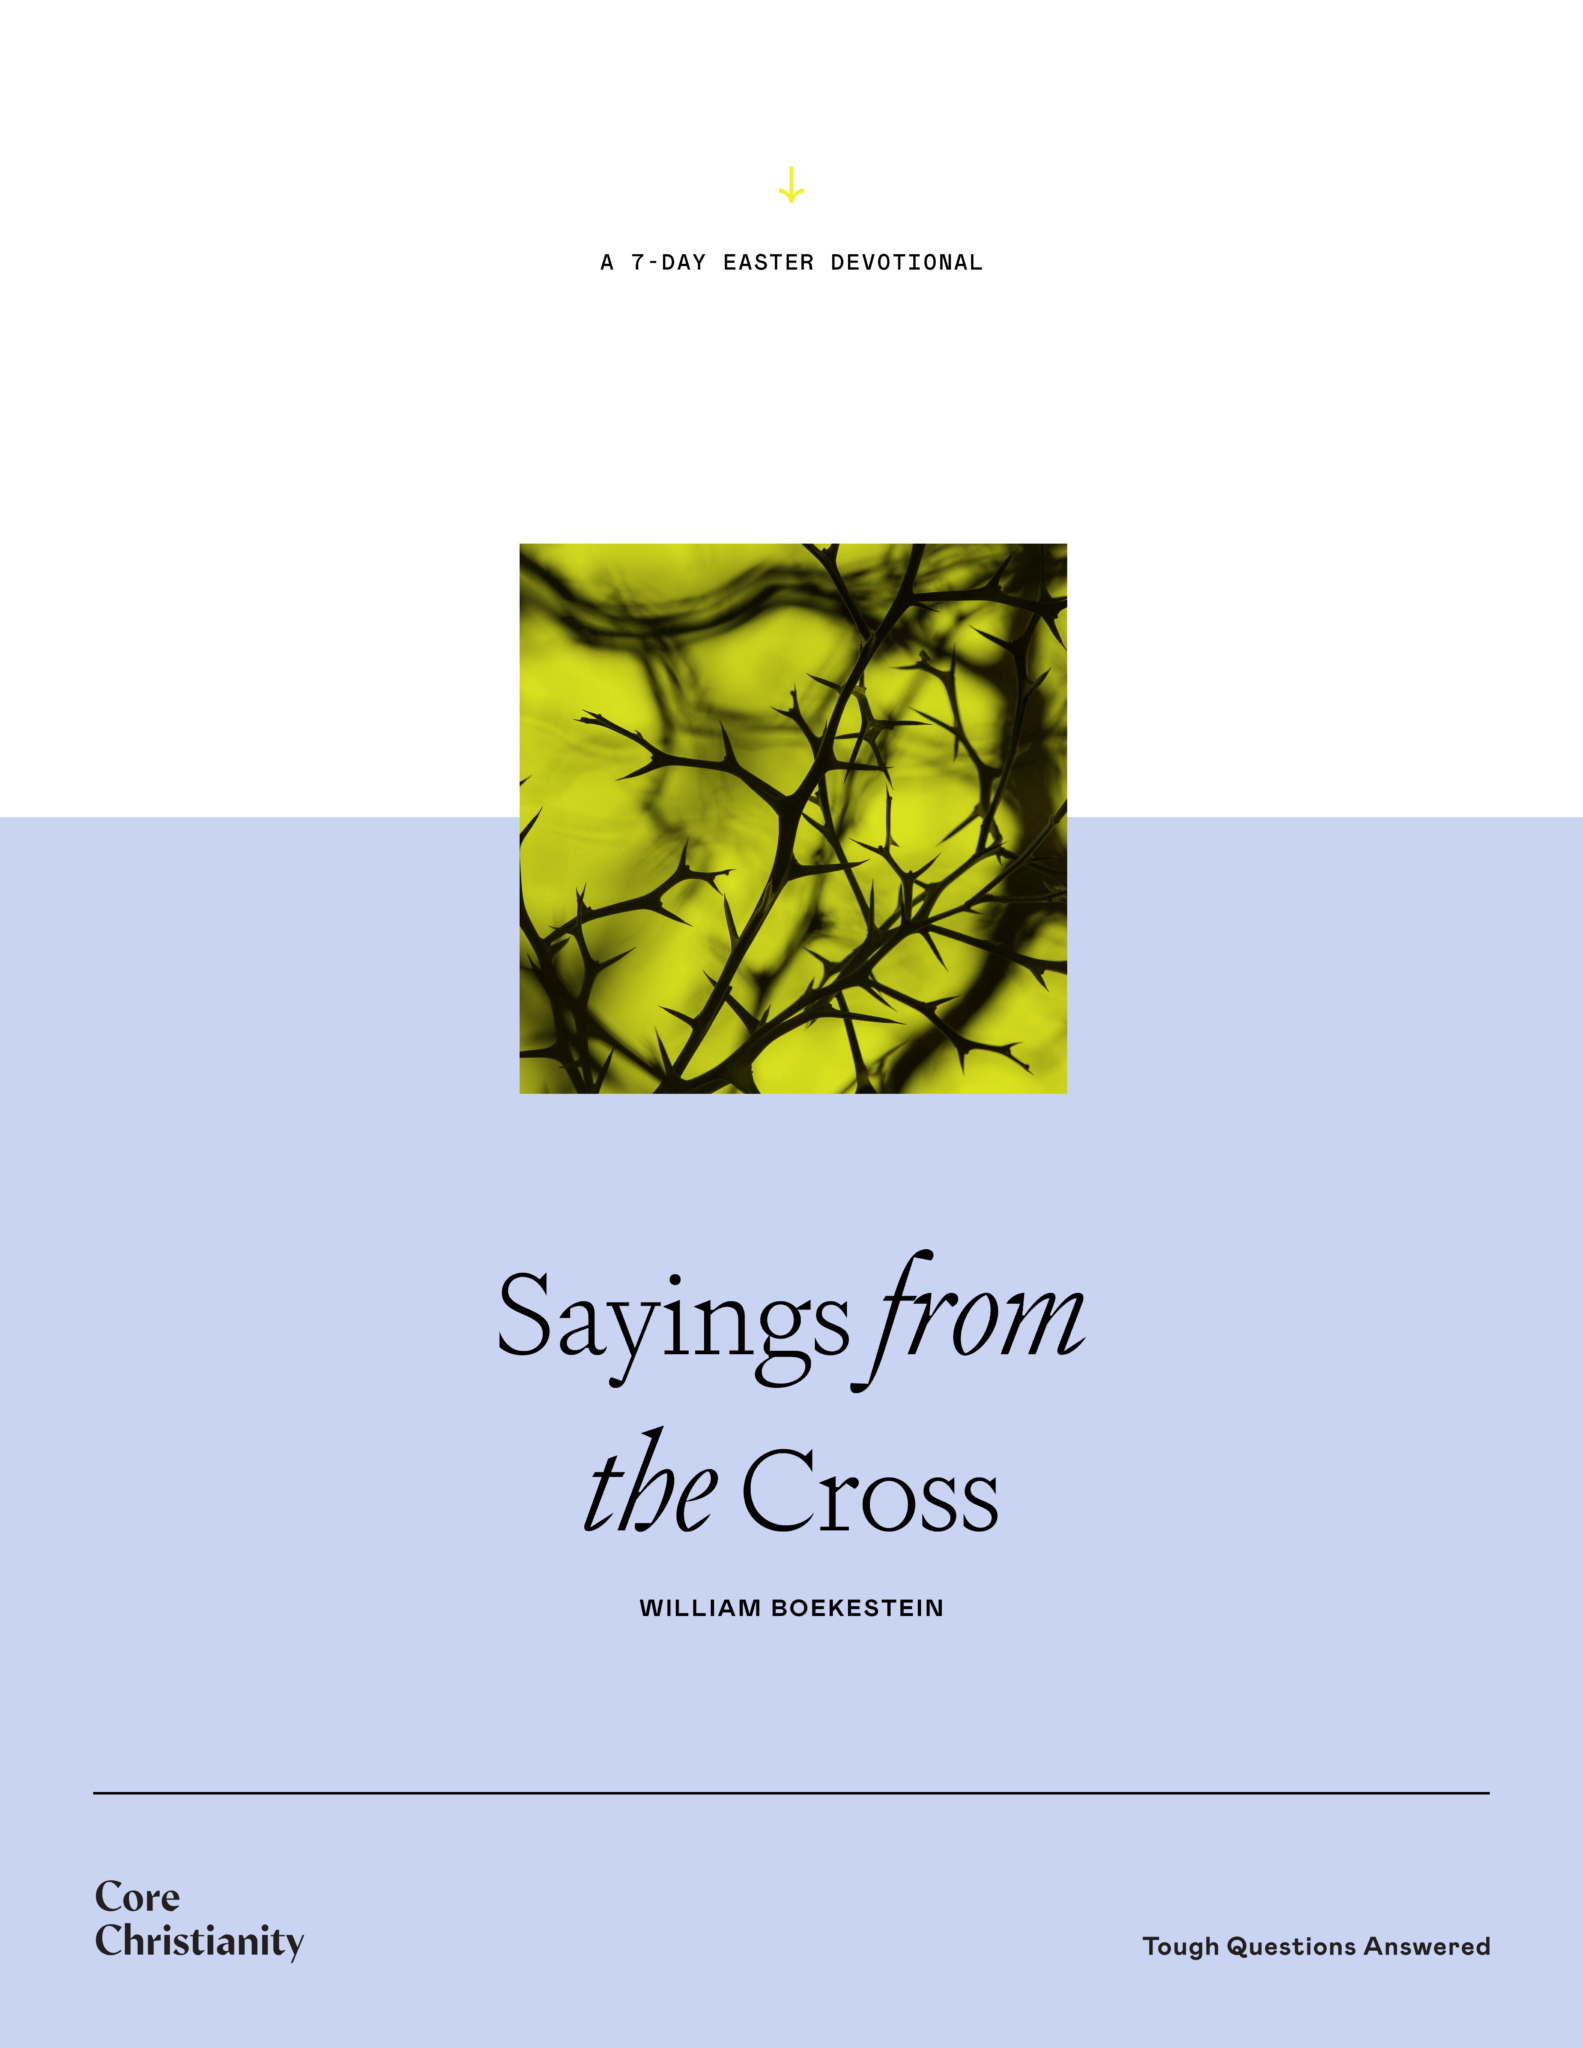 Sayings from the Cross